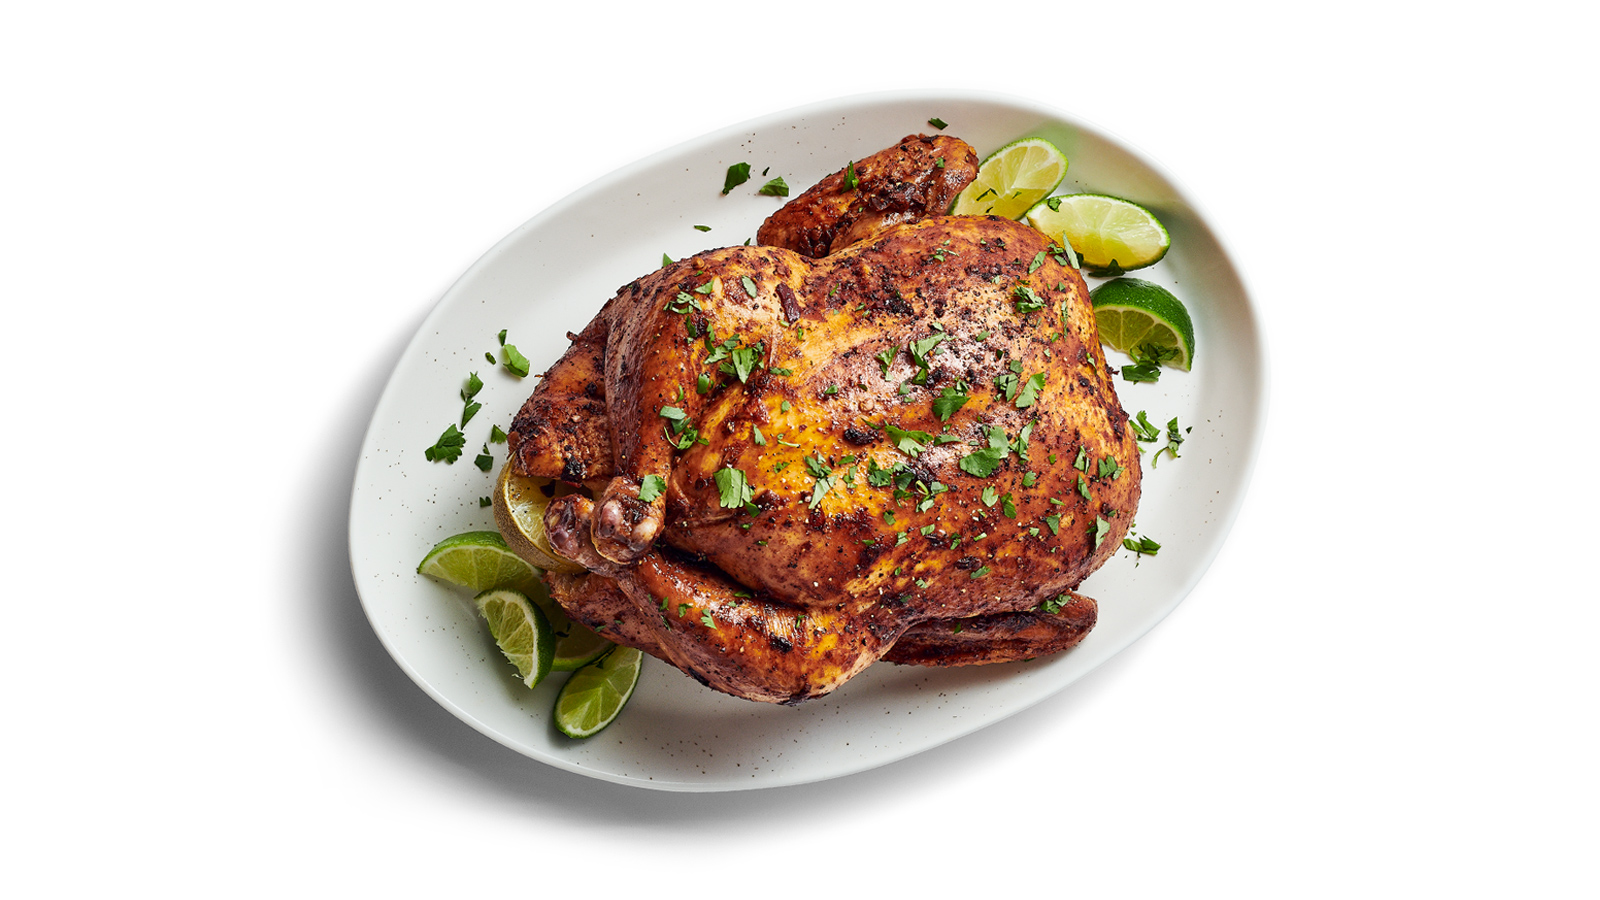 Whole Roasted Chicken with cilantro and lime garnish